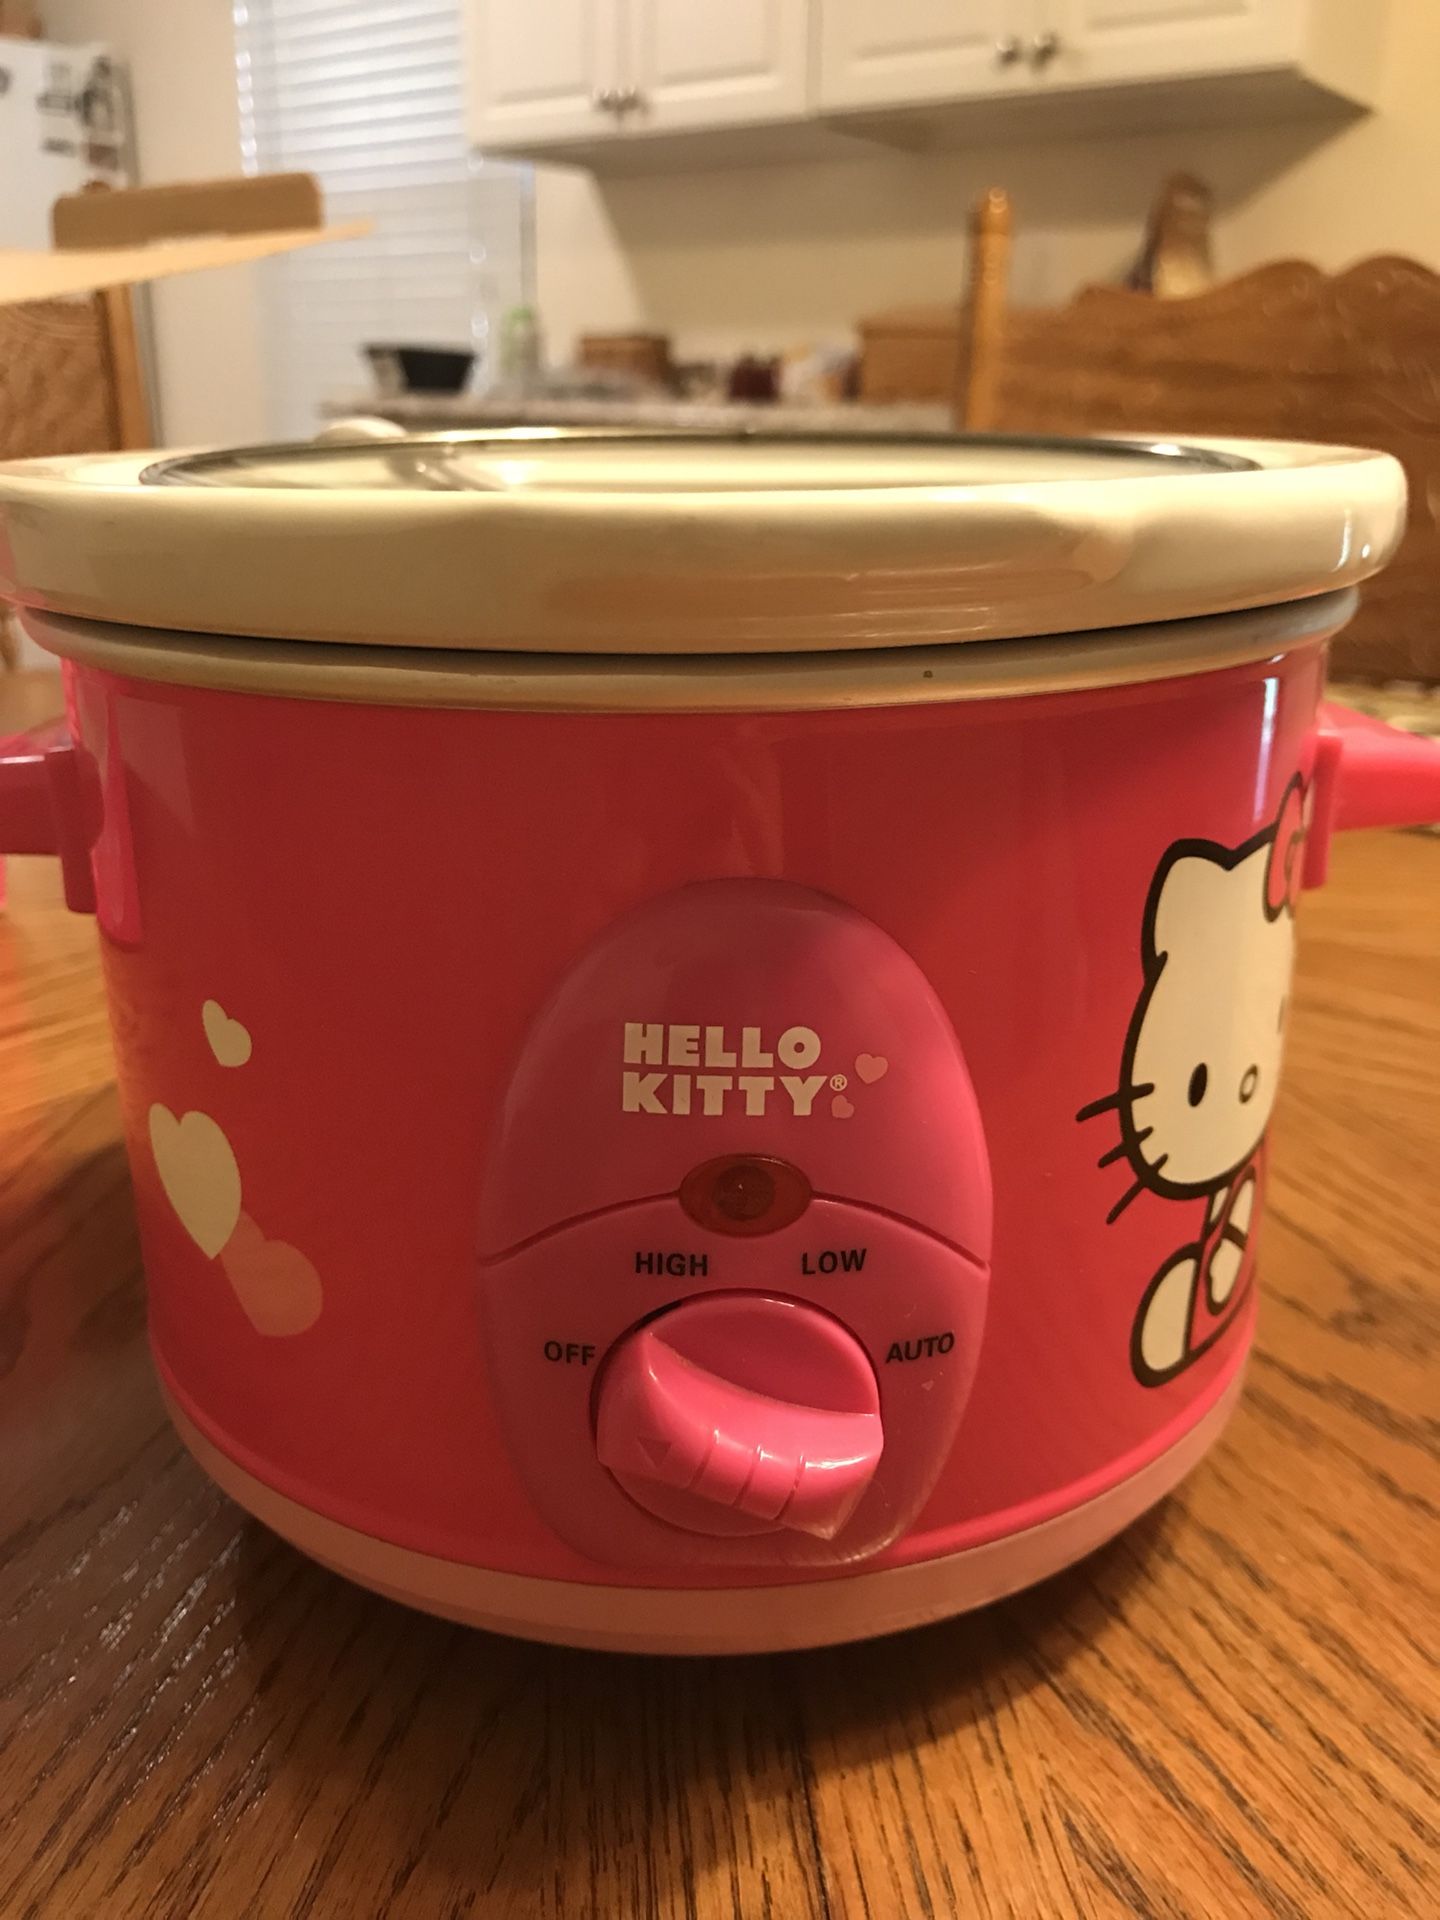  Hello Kitty Slow Cooker - Pink Only $19.99 (Reg. $ 59.99)